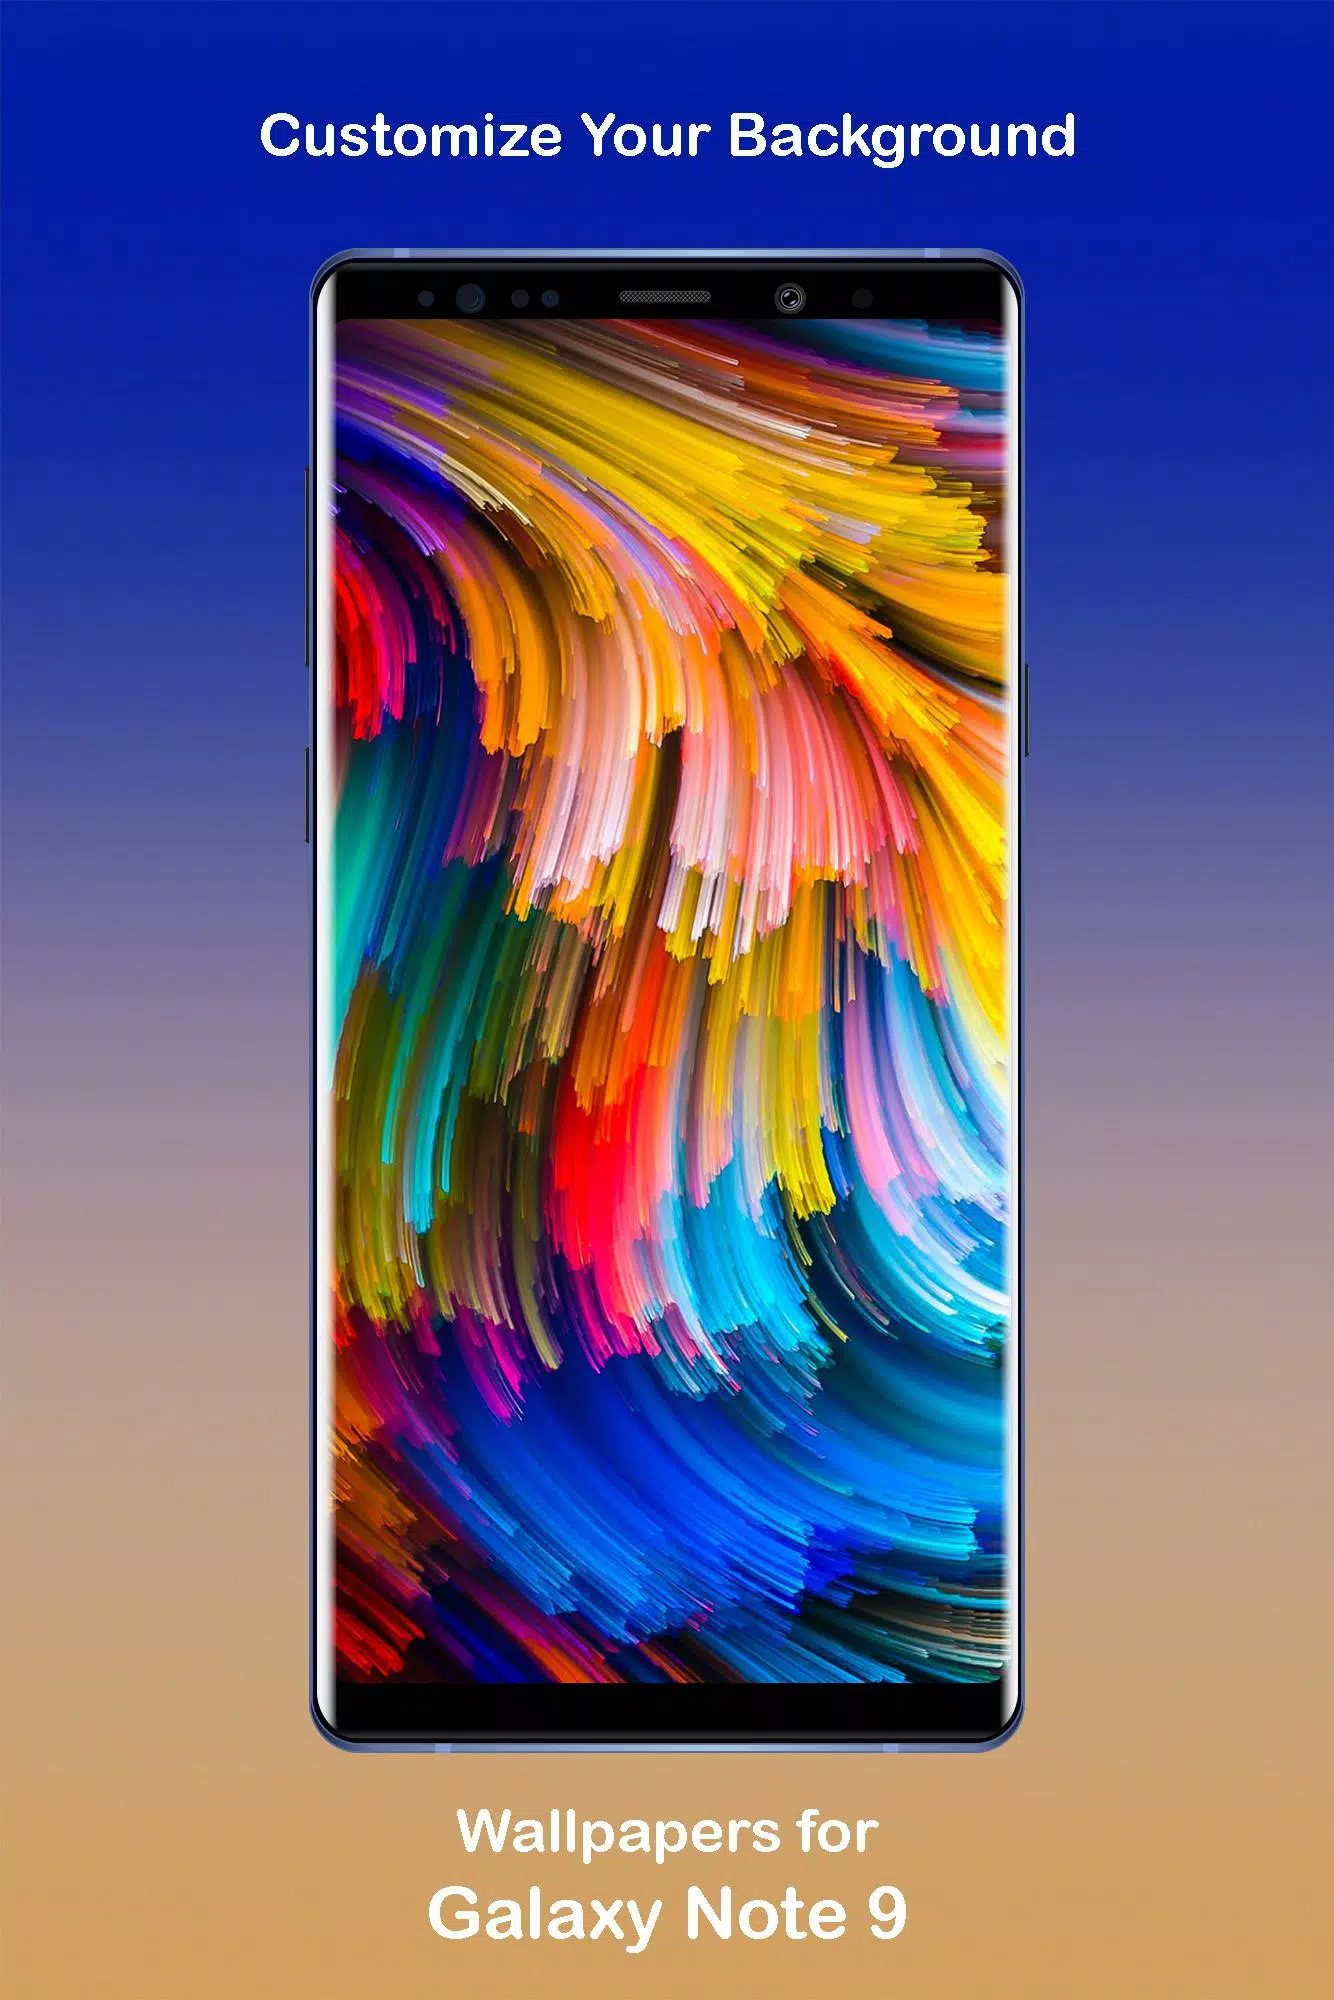 Wallpapers Apk For Android Download